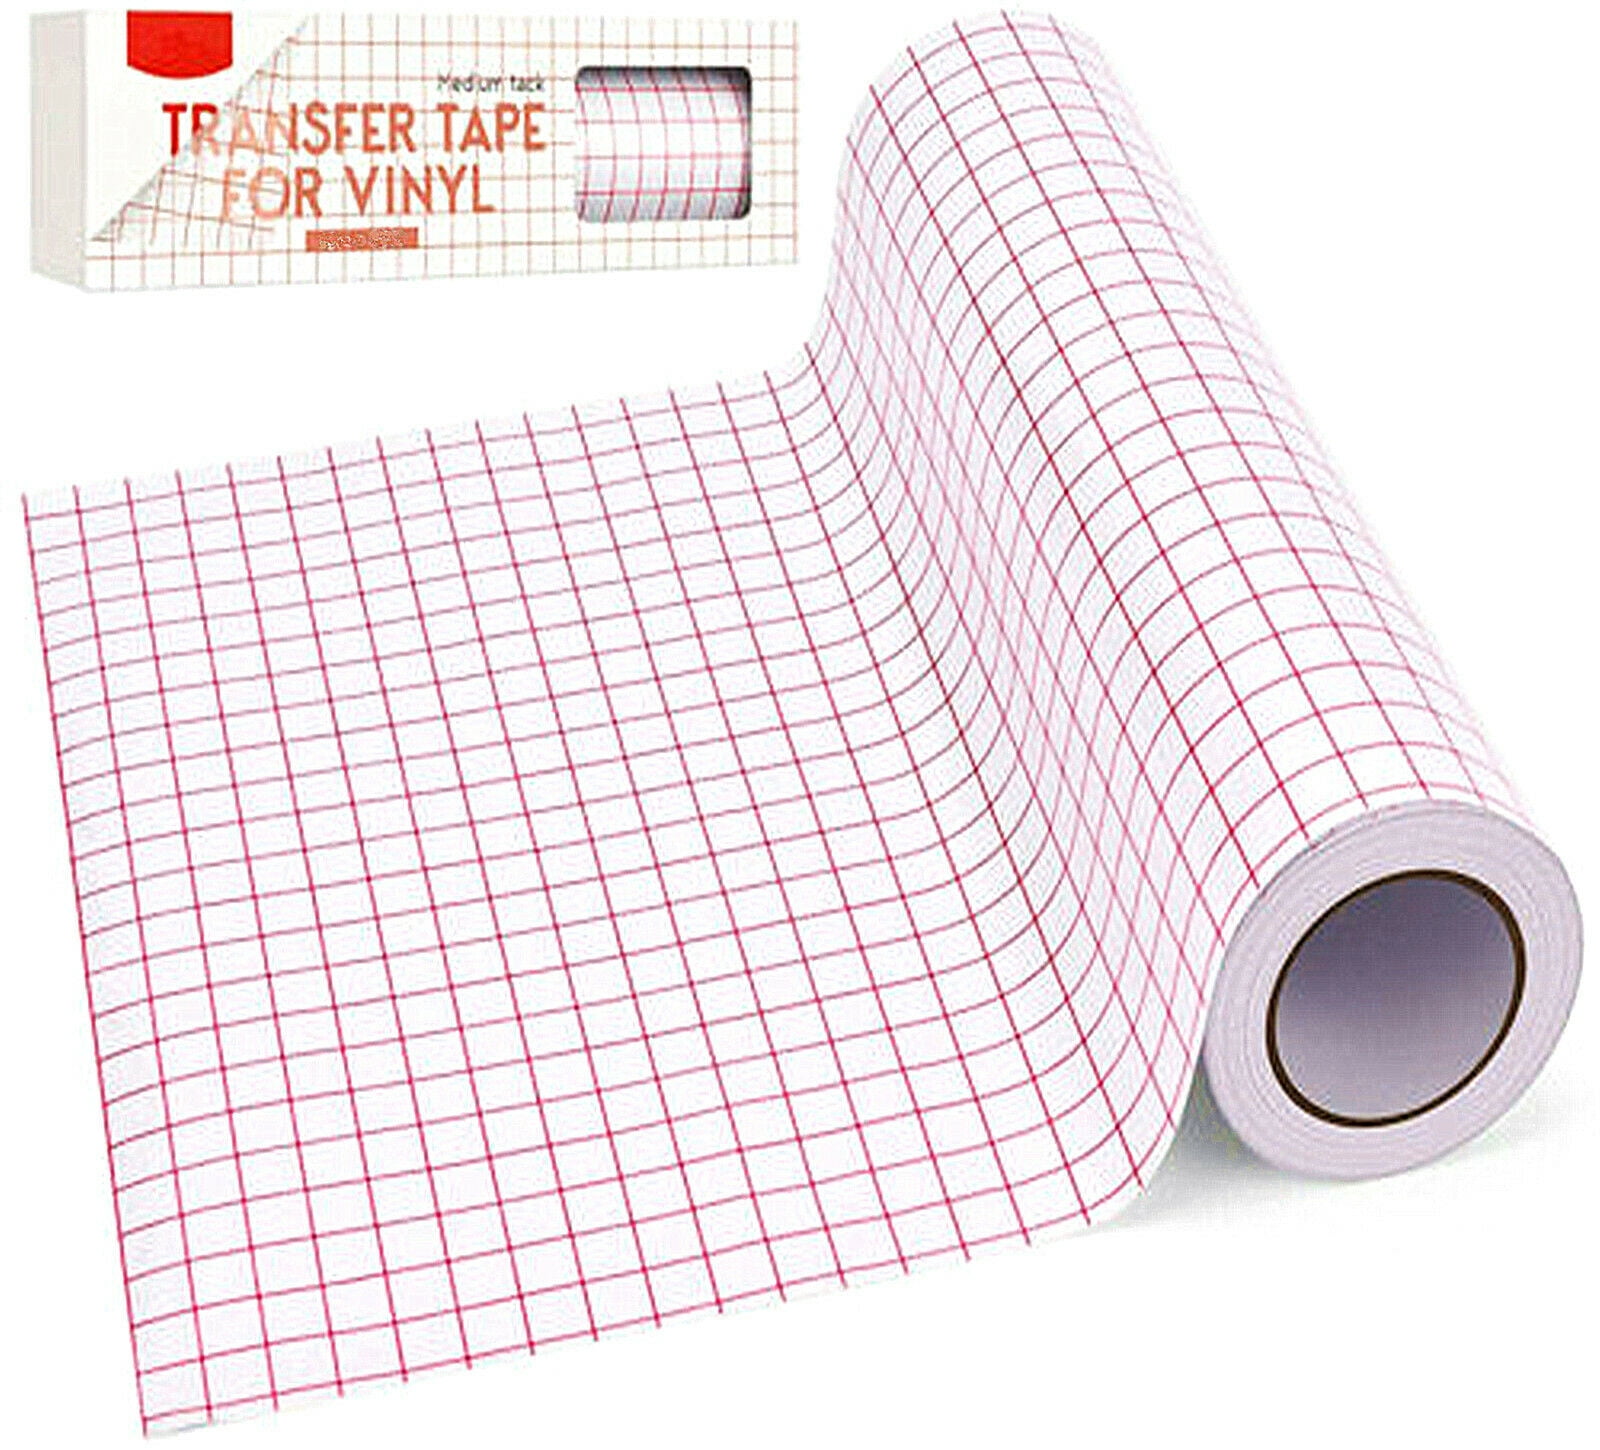 HTVRONT 12 x 200 Feet Transfer Tape for Vinyl with Red Alignment Grid Transfer  paper Perfect for Self Adhesive Vinyl for Signs Stickers Decals Walls Doors  & Windows 